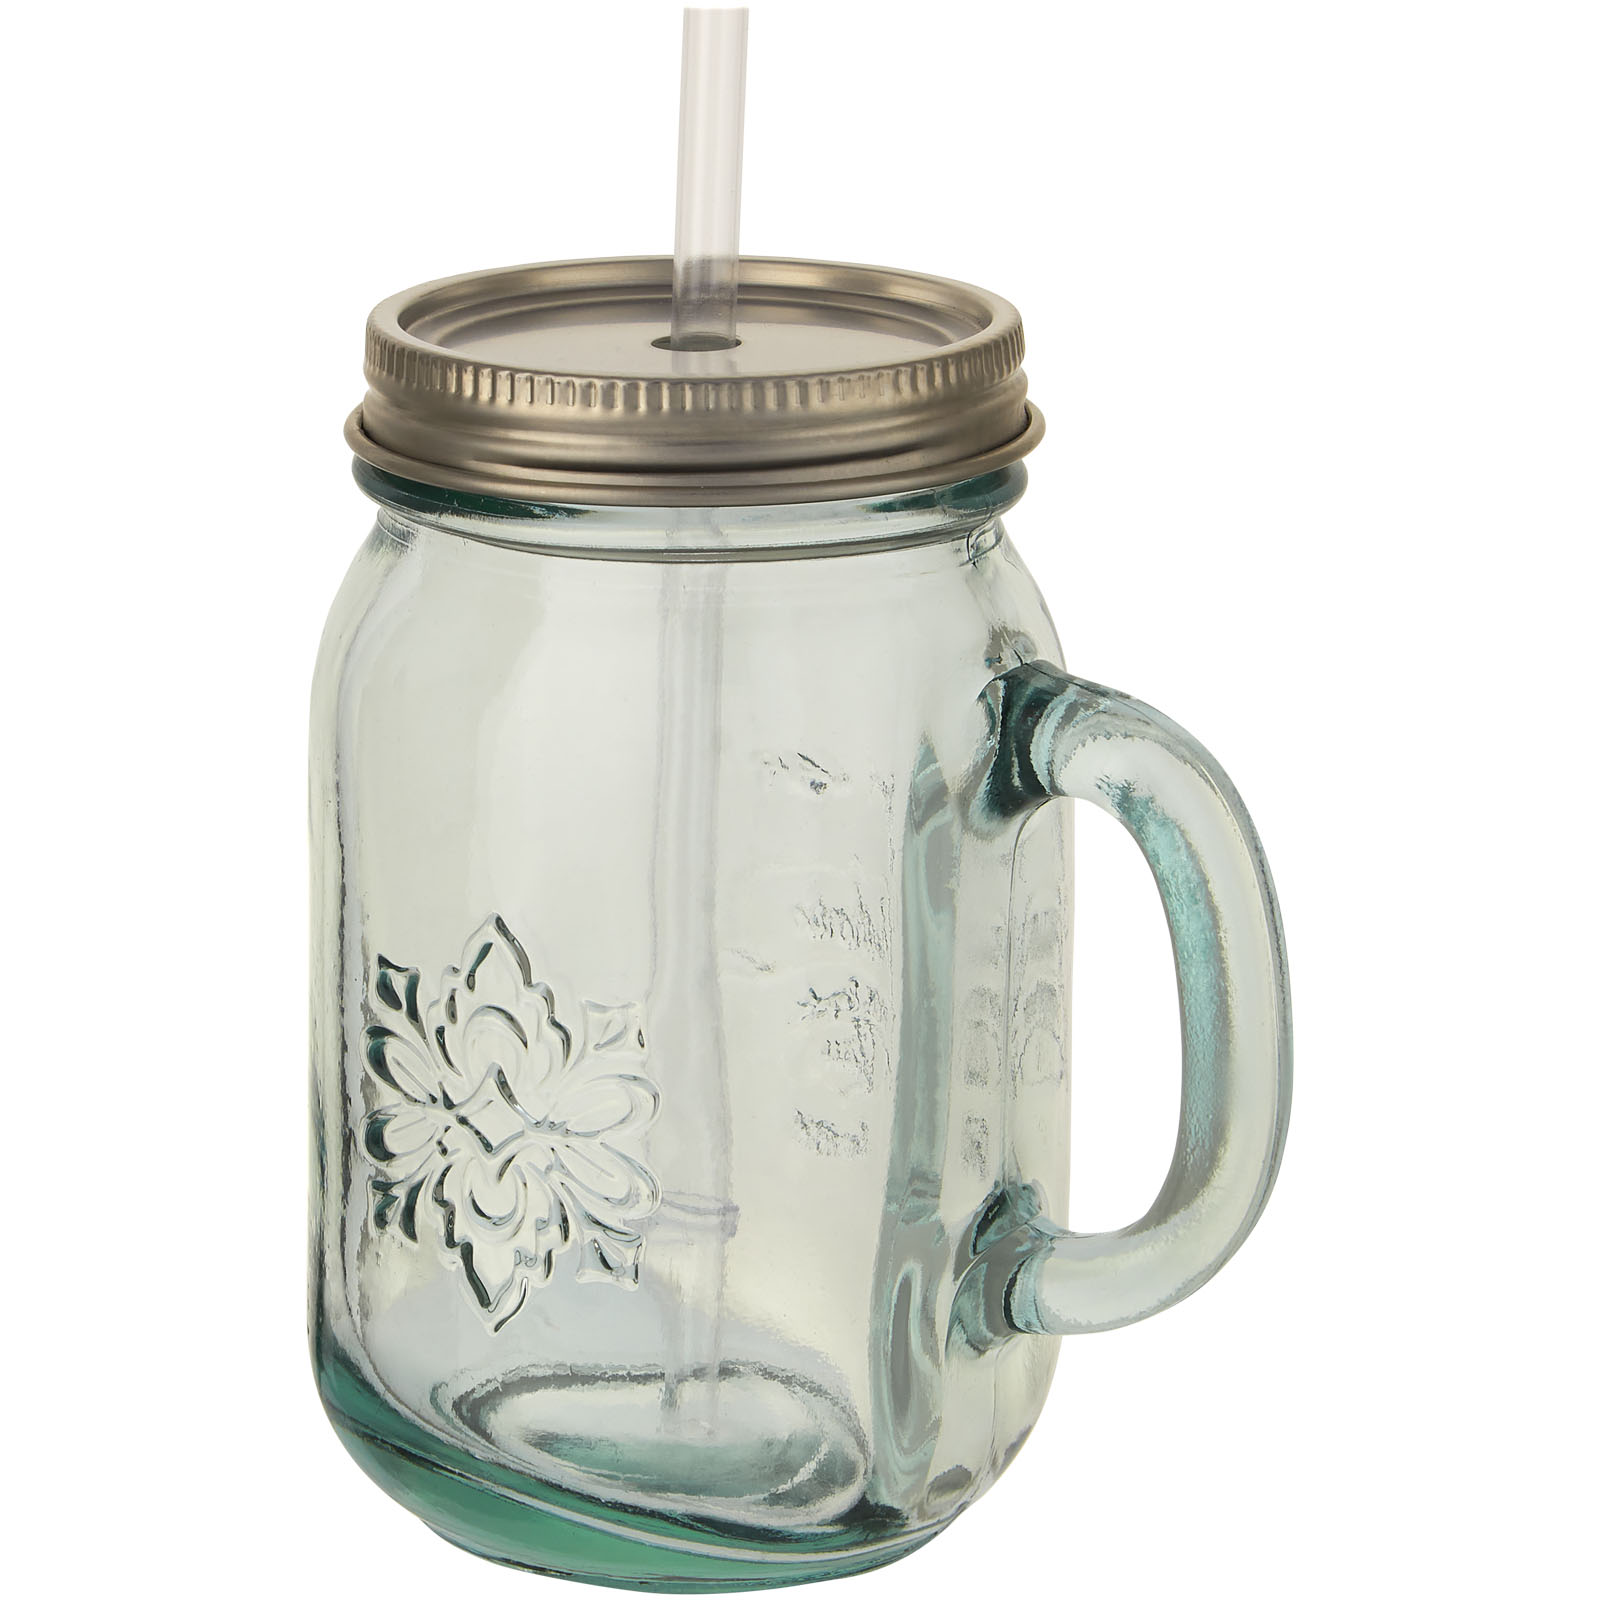 Recycled Glass Mug with Stainless Steel Cap and Straw - Brierley